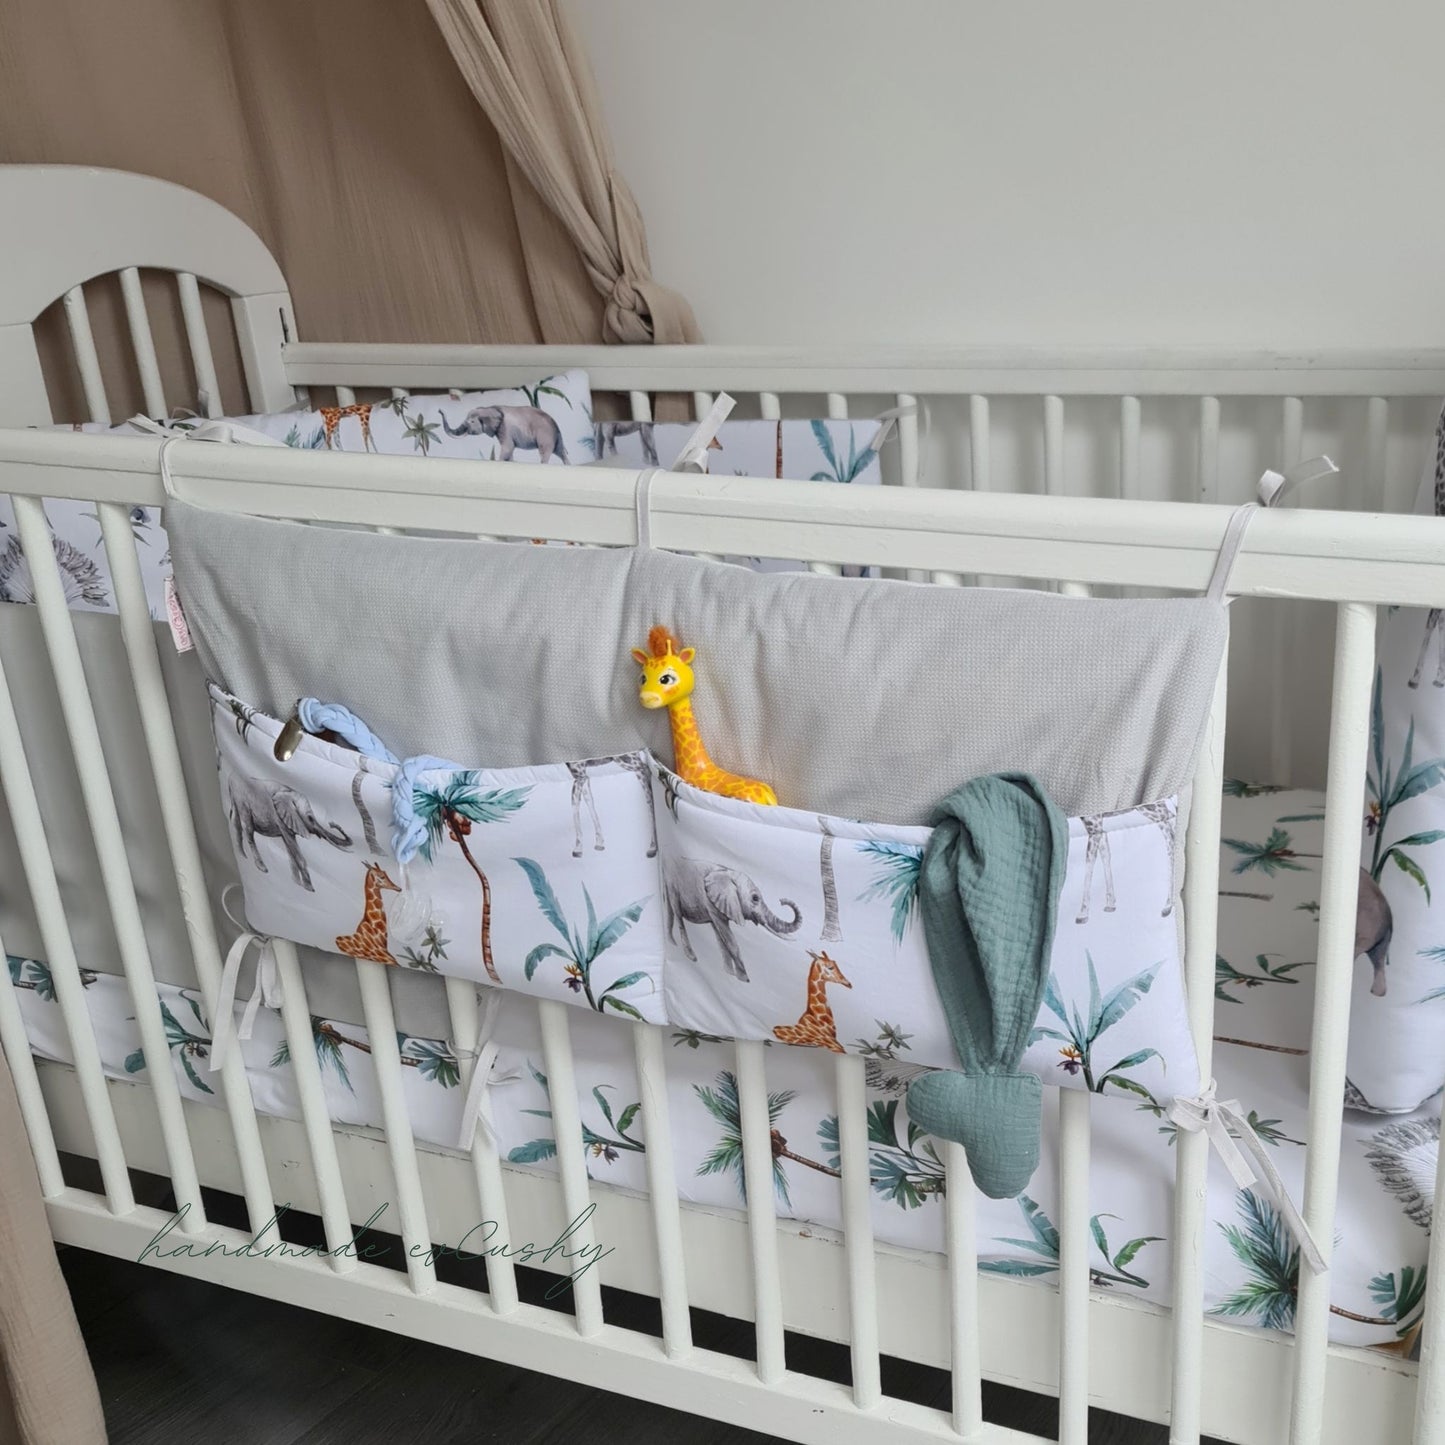 "Image: Safari Collection Cot Organizer – a versatile and stylish nursery accessory that attaches to cot bars, offering convenient storage for baby essentials."